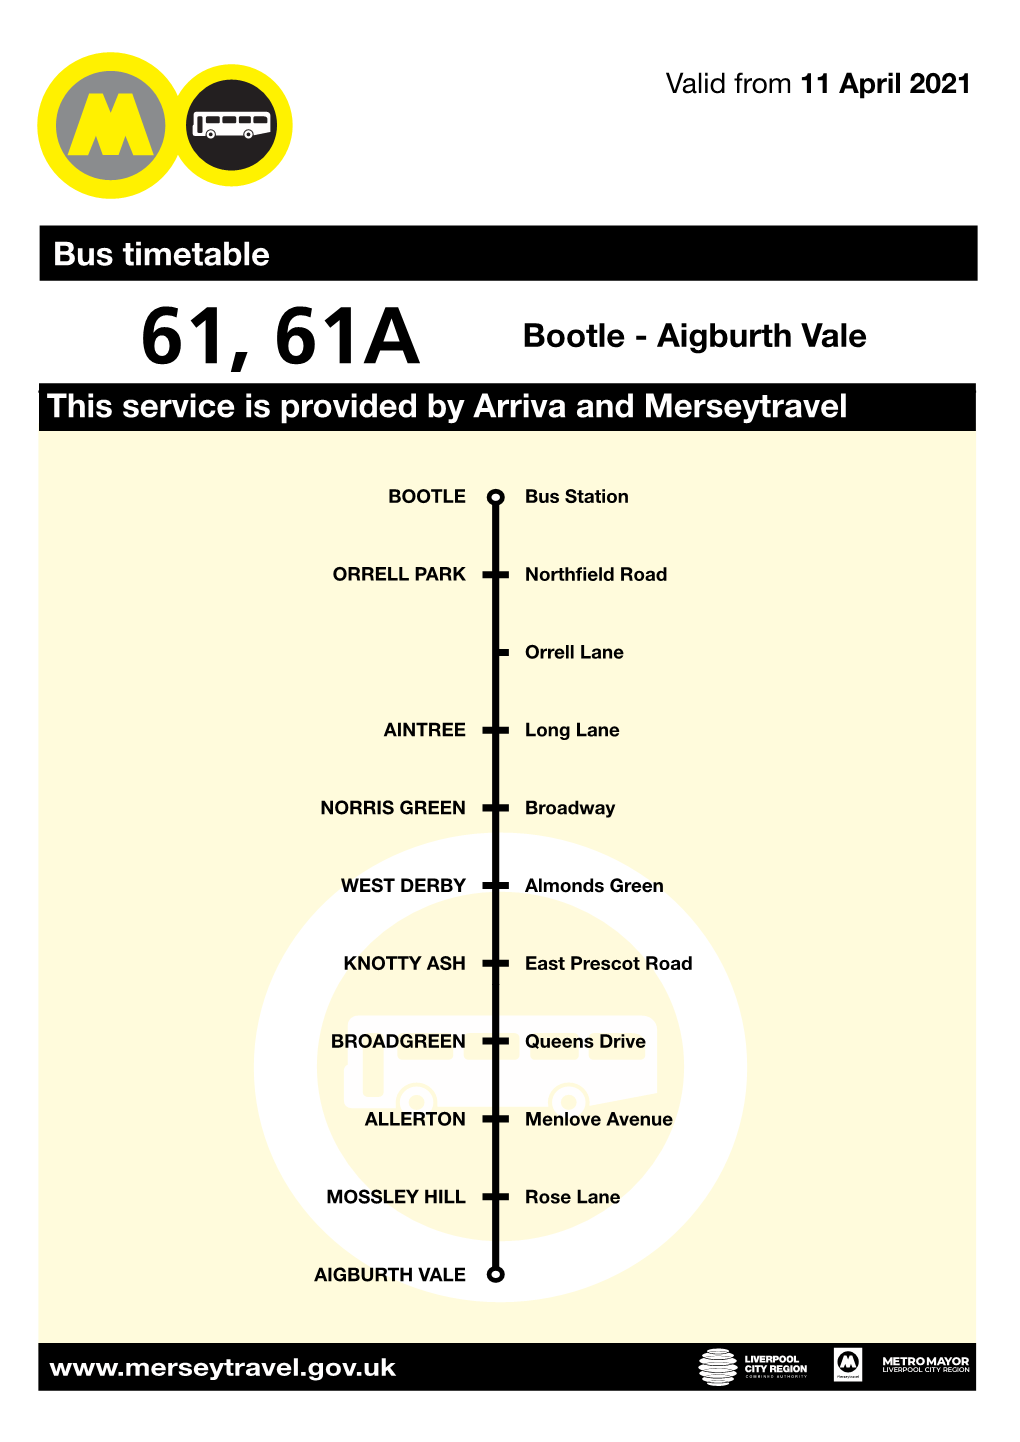 Aigburth Vale This Service Is Provided by Arriva and Merseytravel